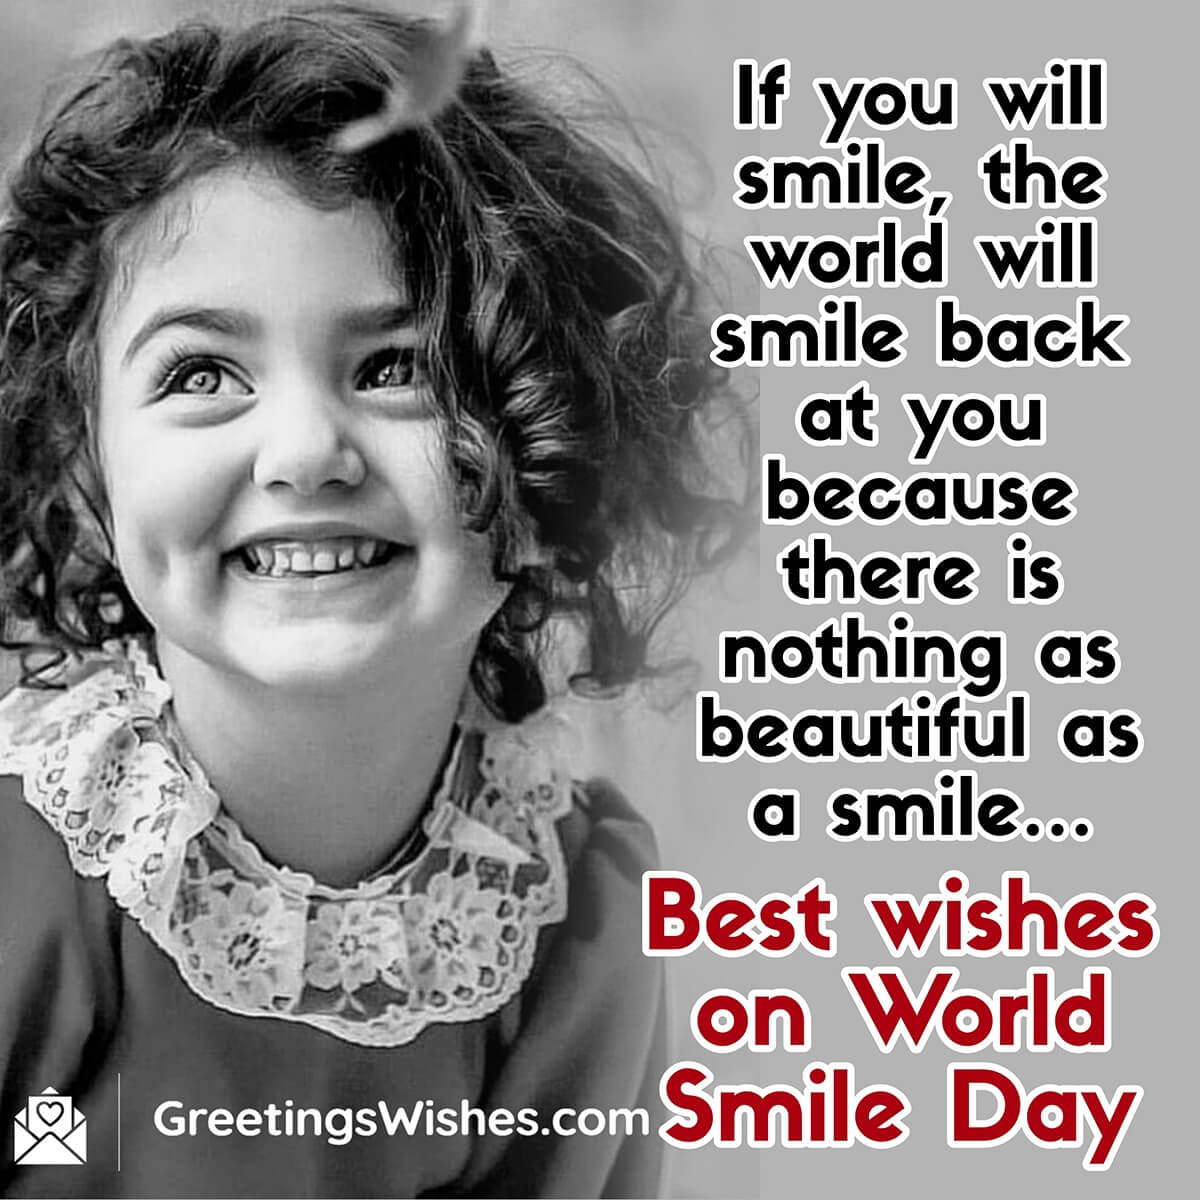 World Smile Day Wishes (6th October) - Greetings Wishes